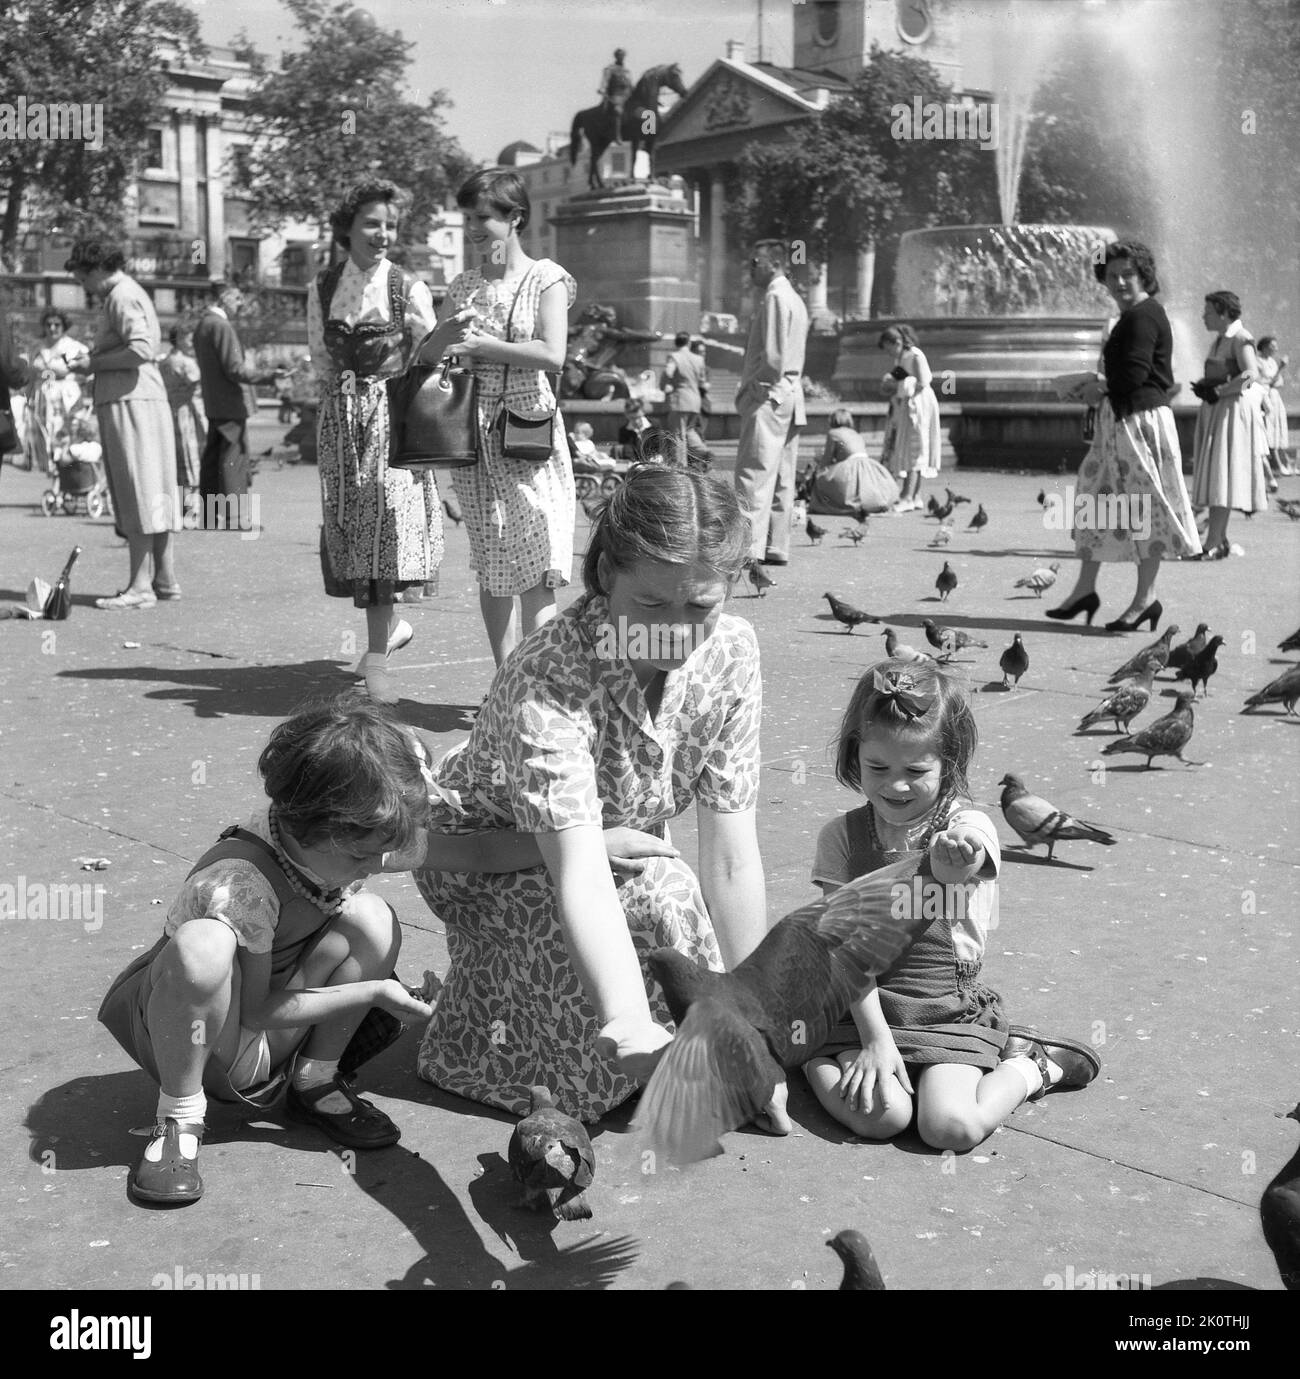 1950s, historical, with her two young daugthers beside her, a lady with her two hands outstretched feeding the pigeons at Trafalgar Square, London, England, UK. A traditional activity for over a hundred years, flocks of pigeons would descend upon the square to receive food from those visiting the famous Central London landmark. Stock Photo